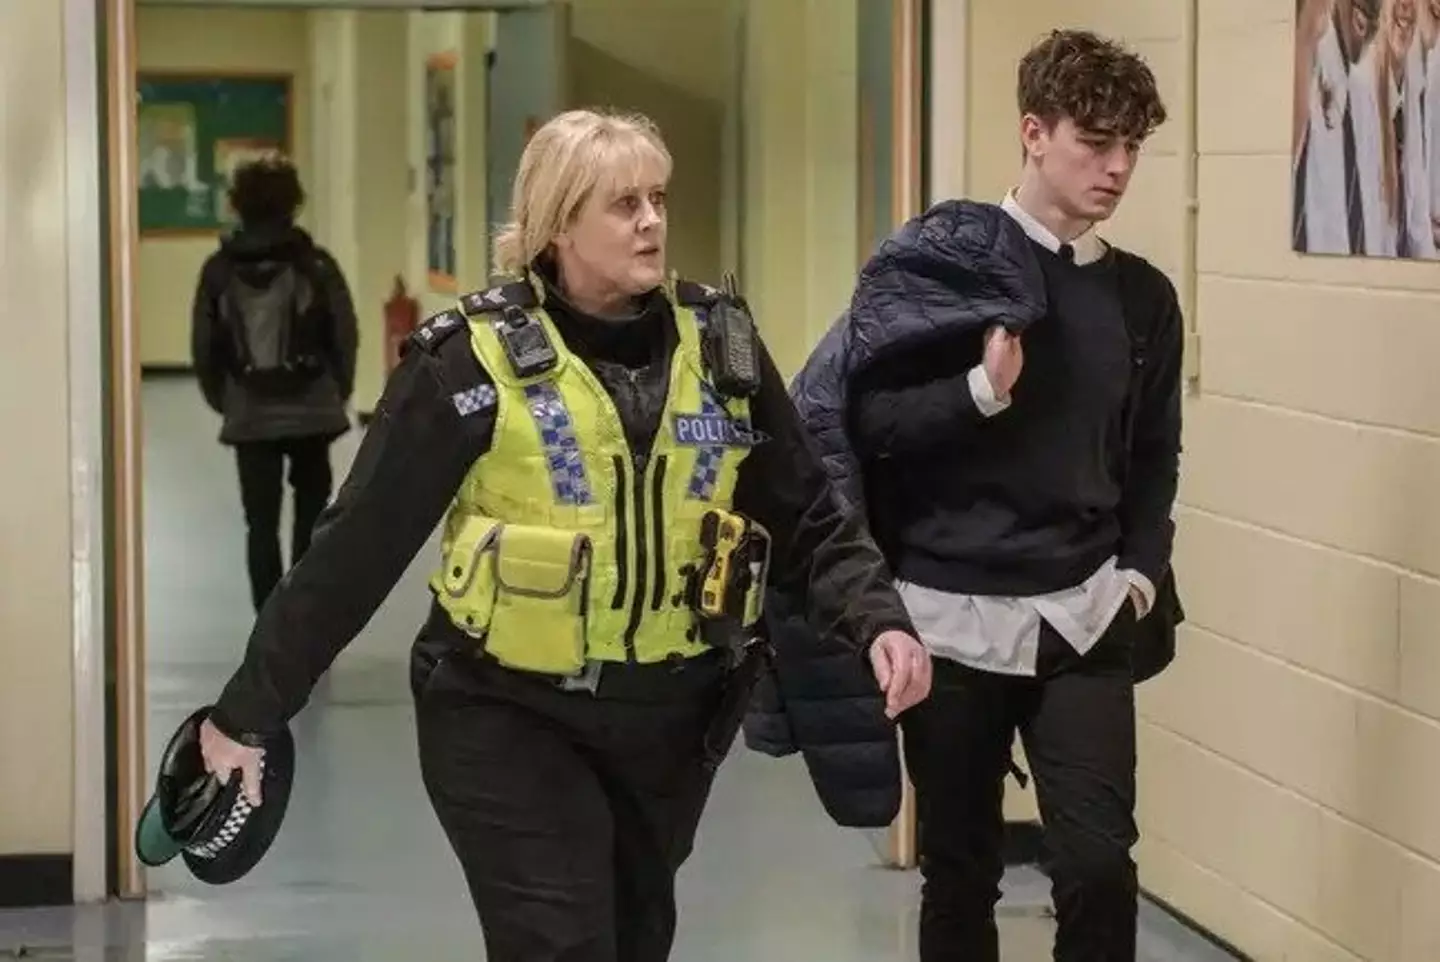 Happy Valley's finale aired on the BBC on Sunday (5 February).